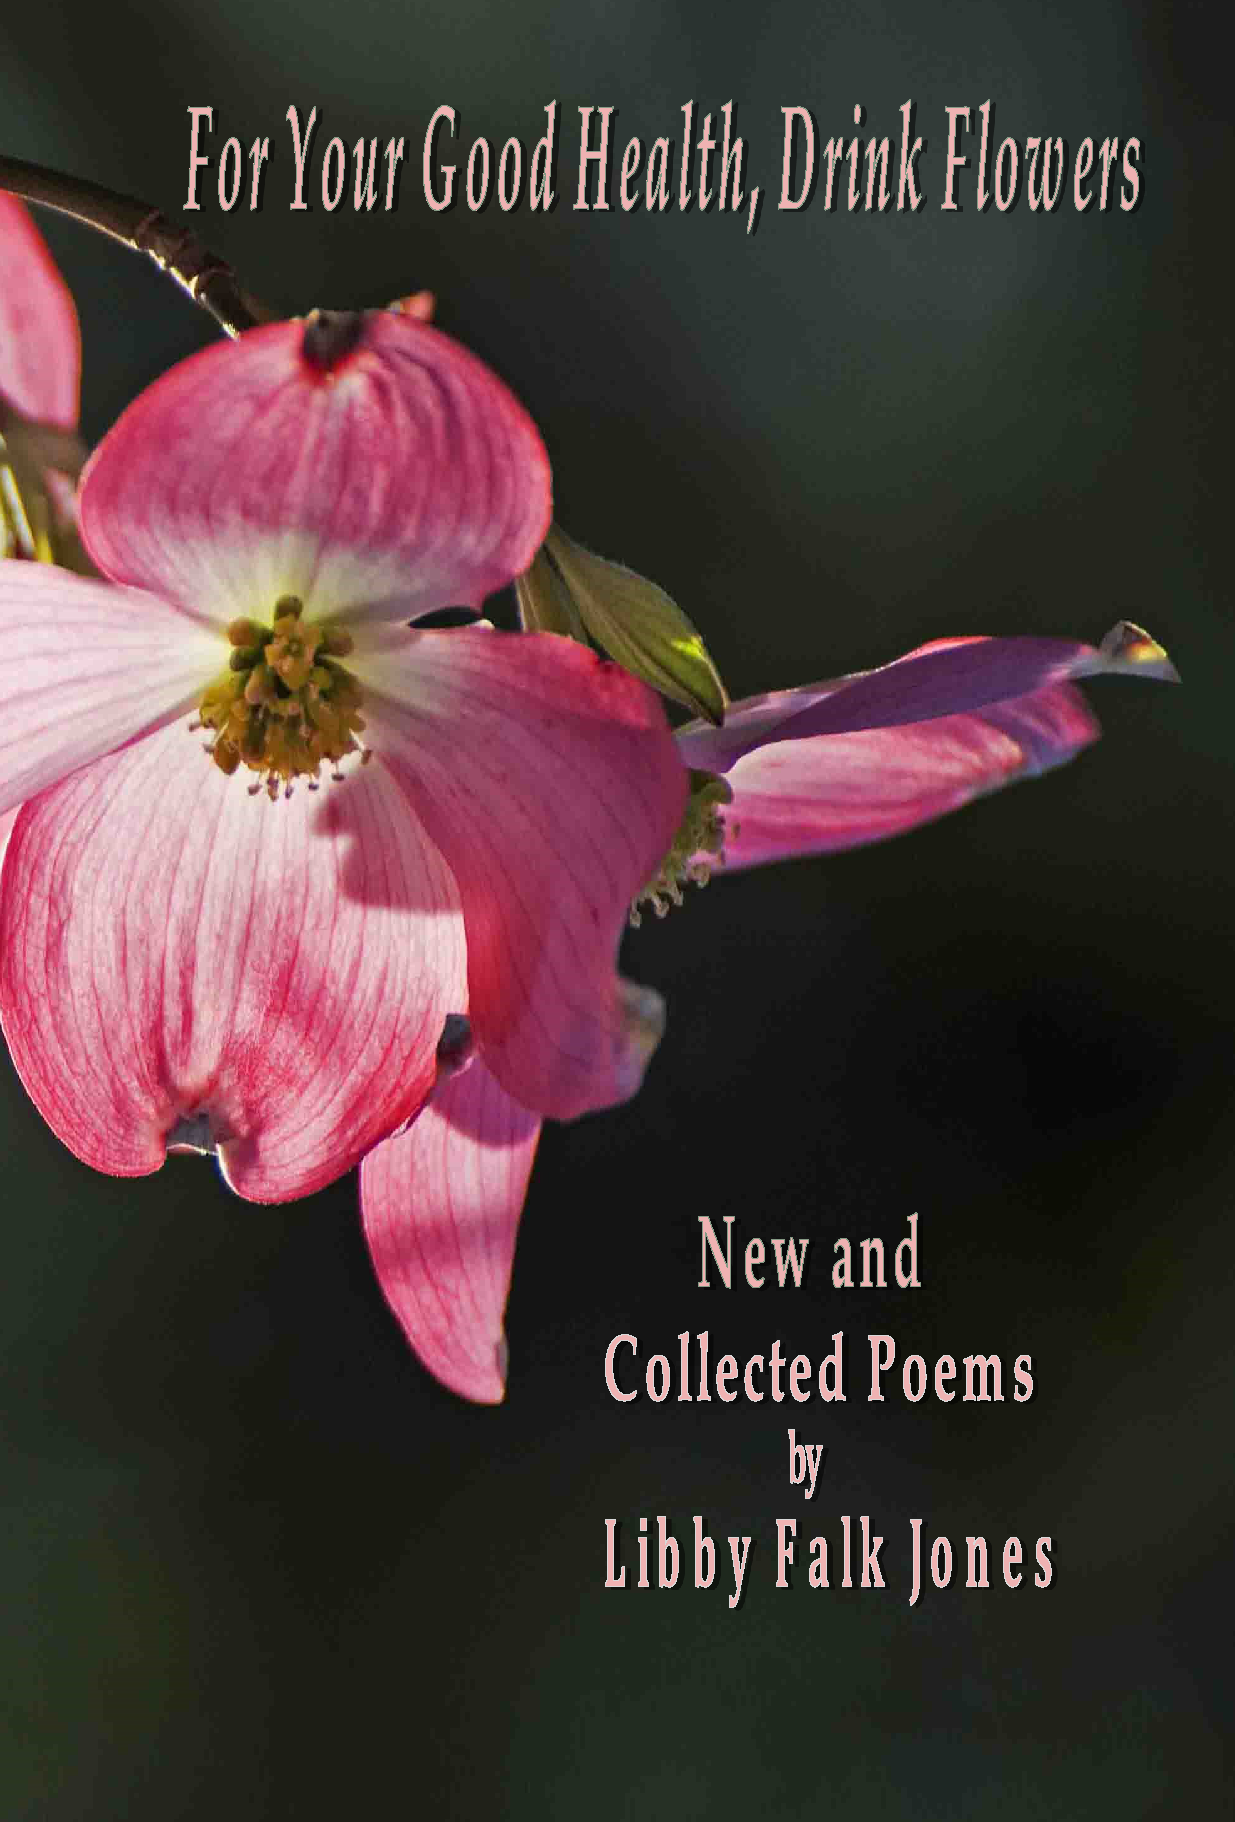 Libby Falk Jones to Participate in the Kentucky Book Festival with “For Your Good Health, Drink Flowers: New and Collected Poems”